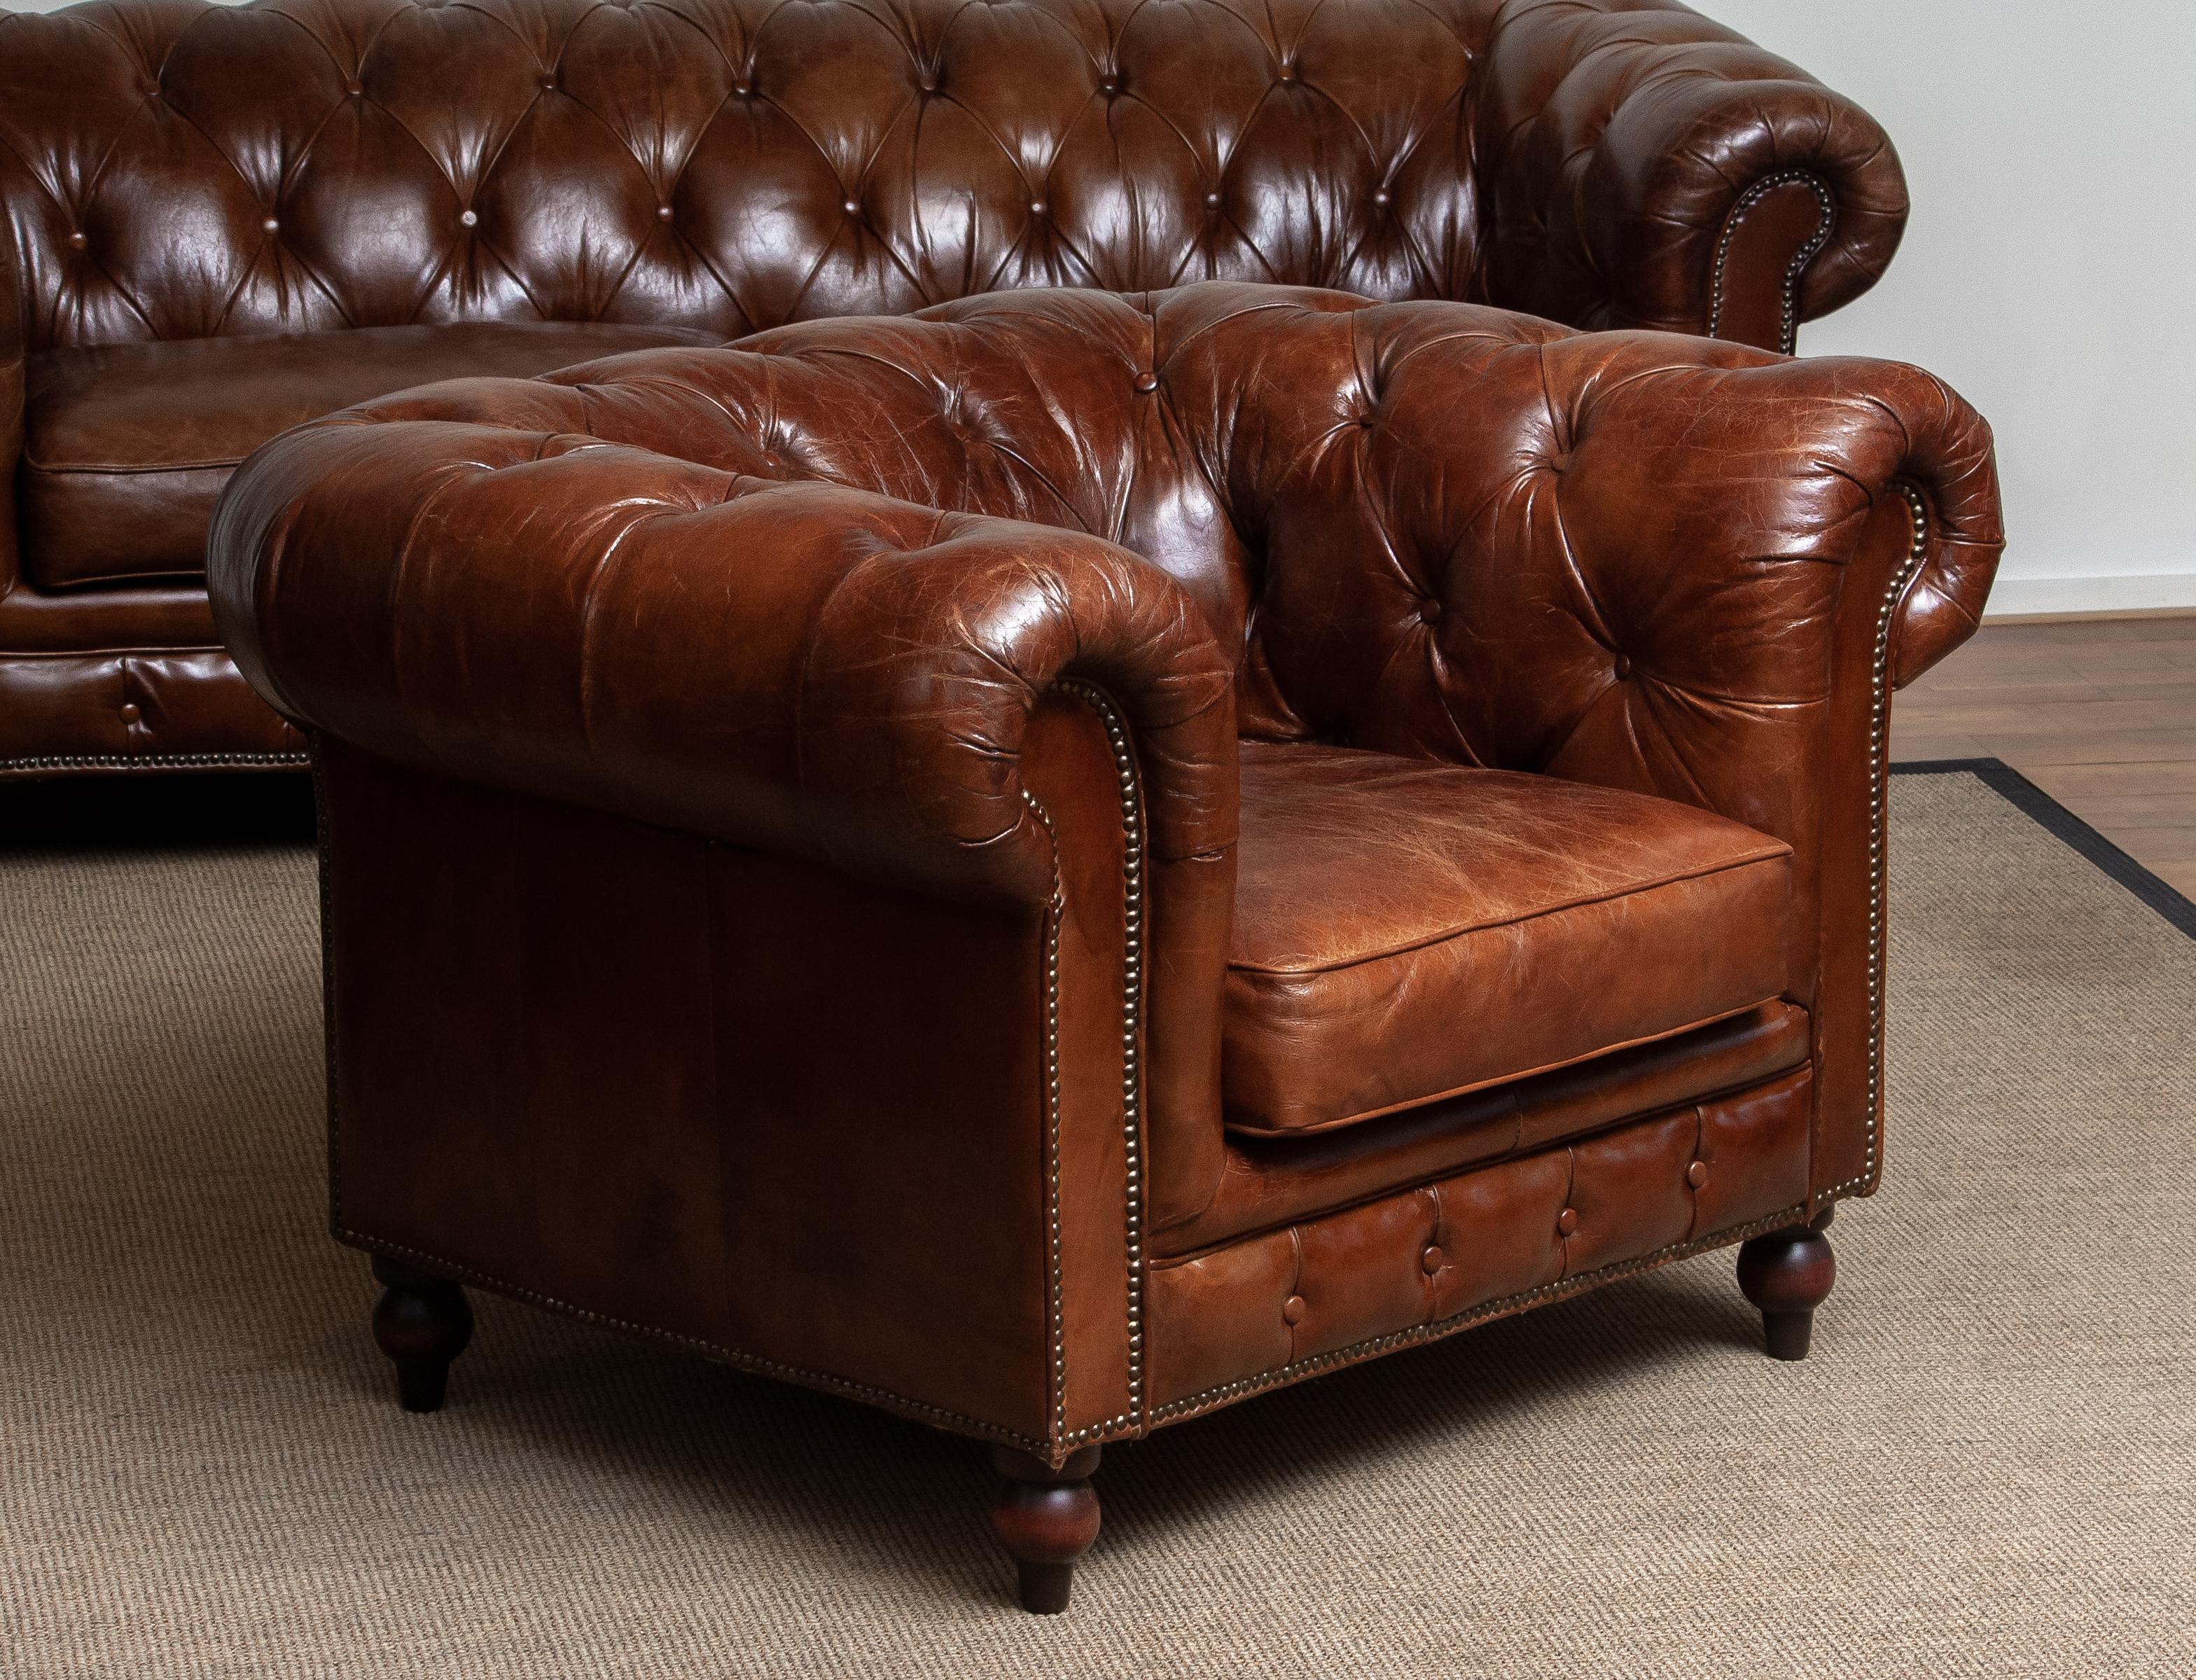 Tufted Brown Leather Chesterfield Sofa and Arm / Lounge Chair In Good Condition In Silvolde, Gelderland